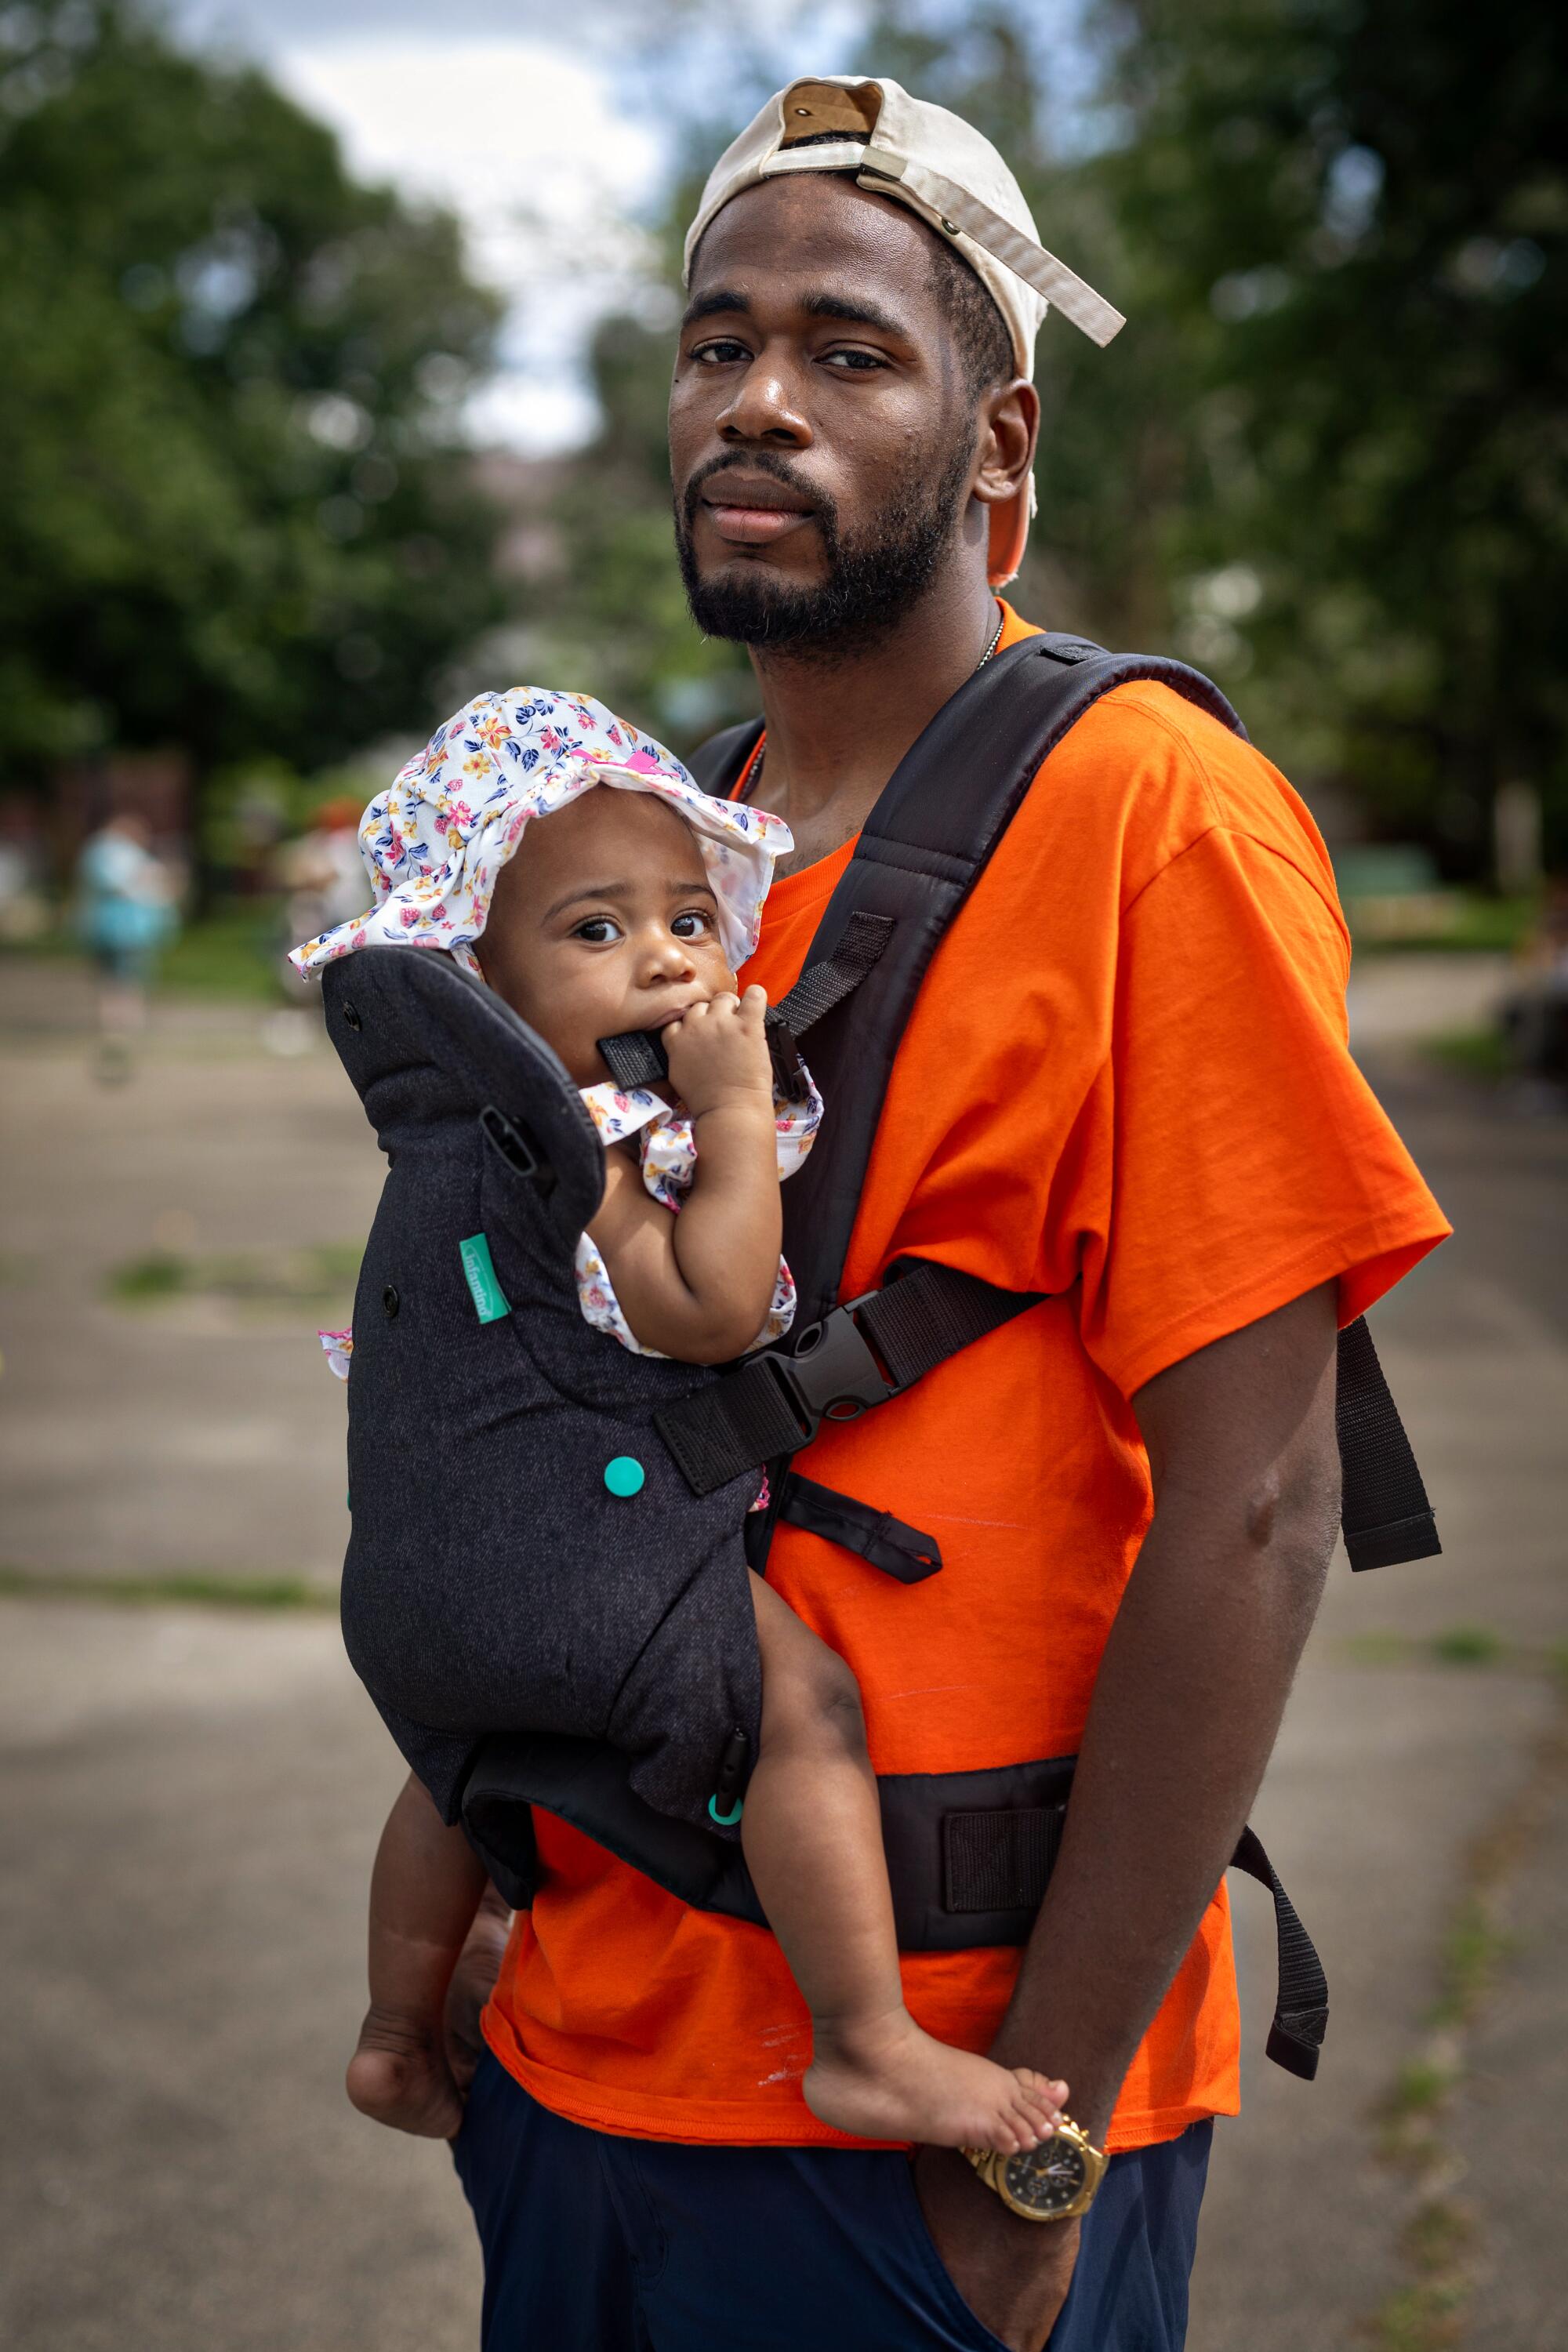 Robert Jackson and his daughter, Blessing, at the Milwaukee Childcare Collective event.